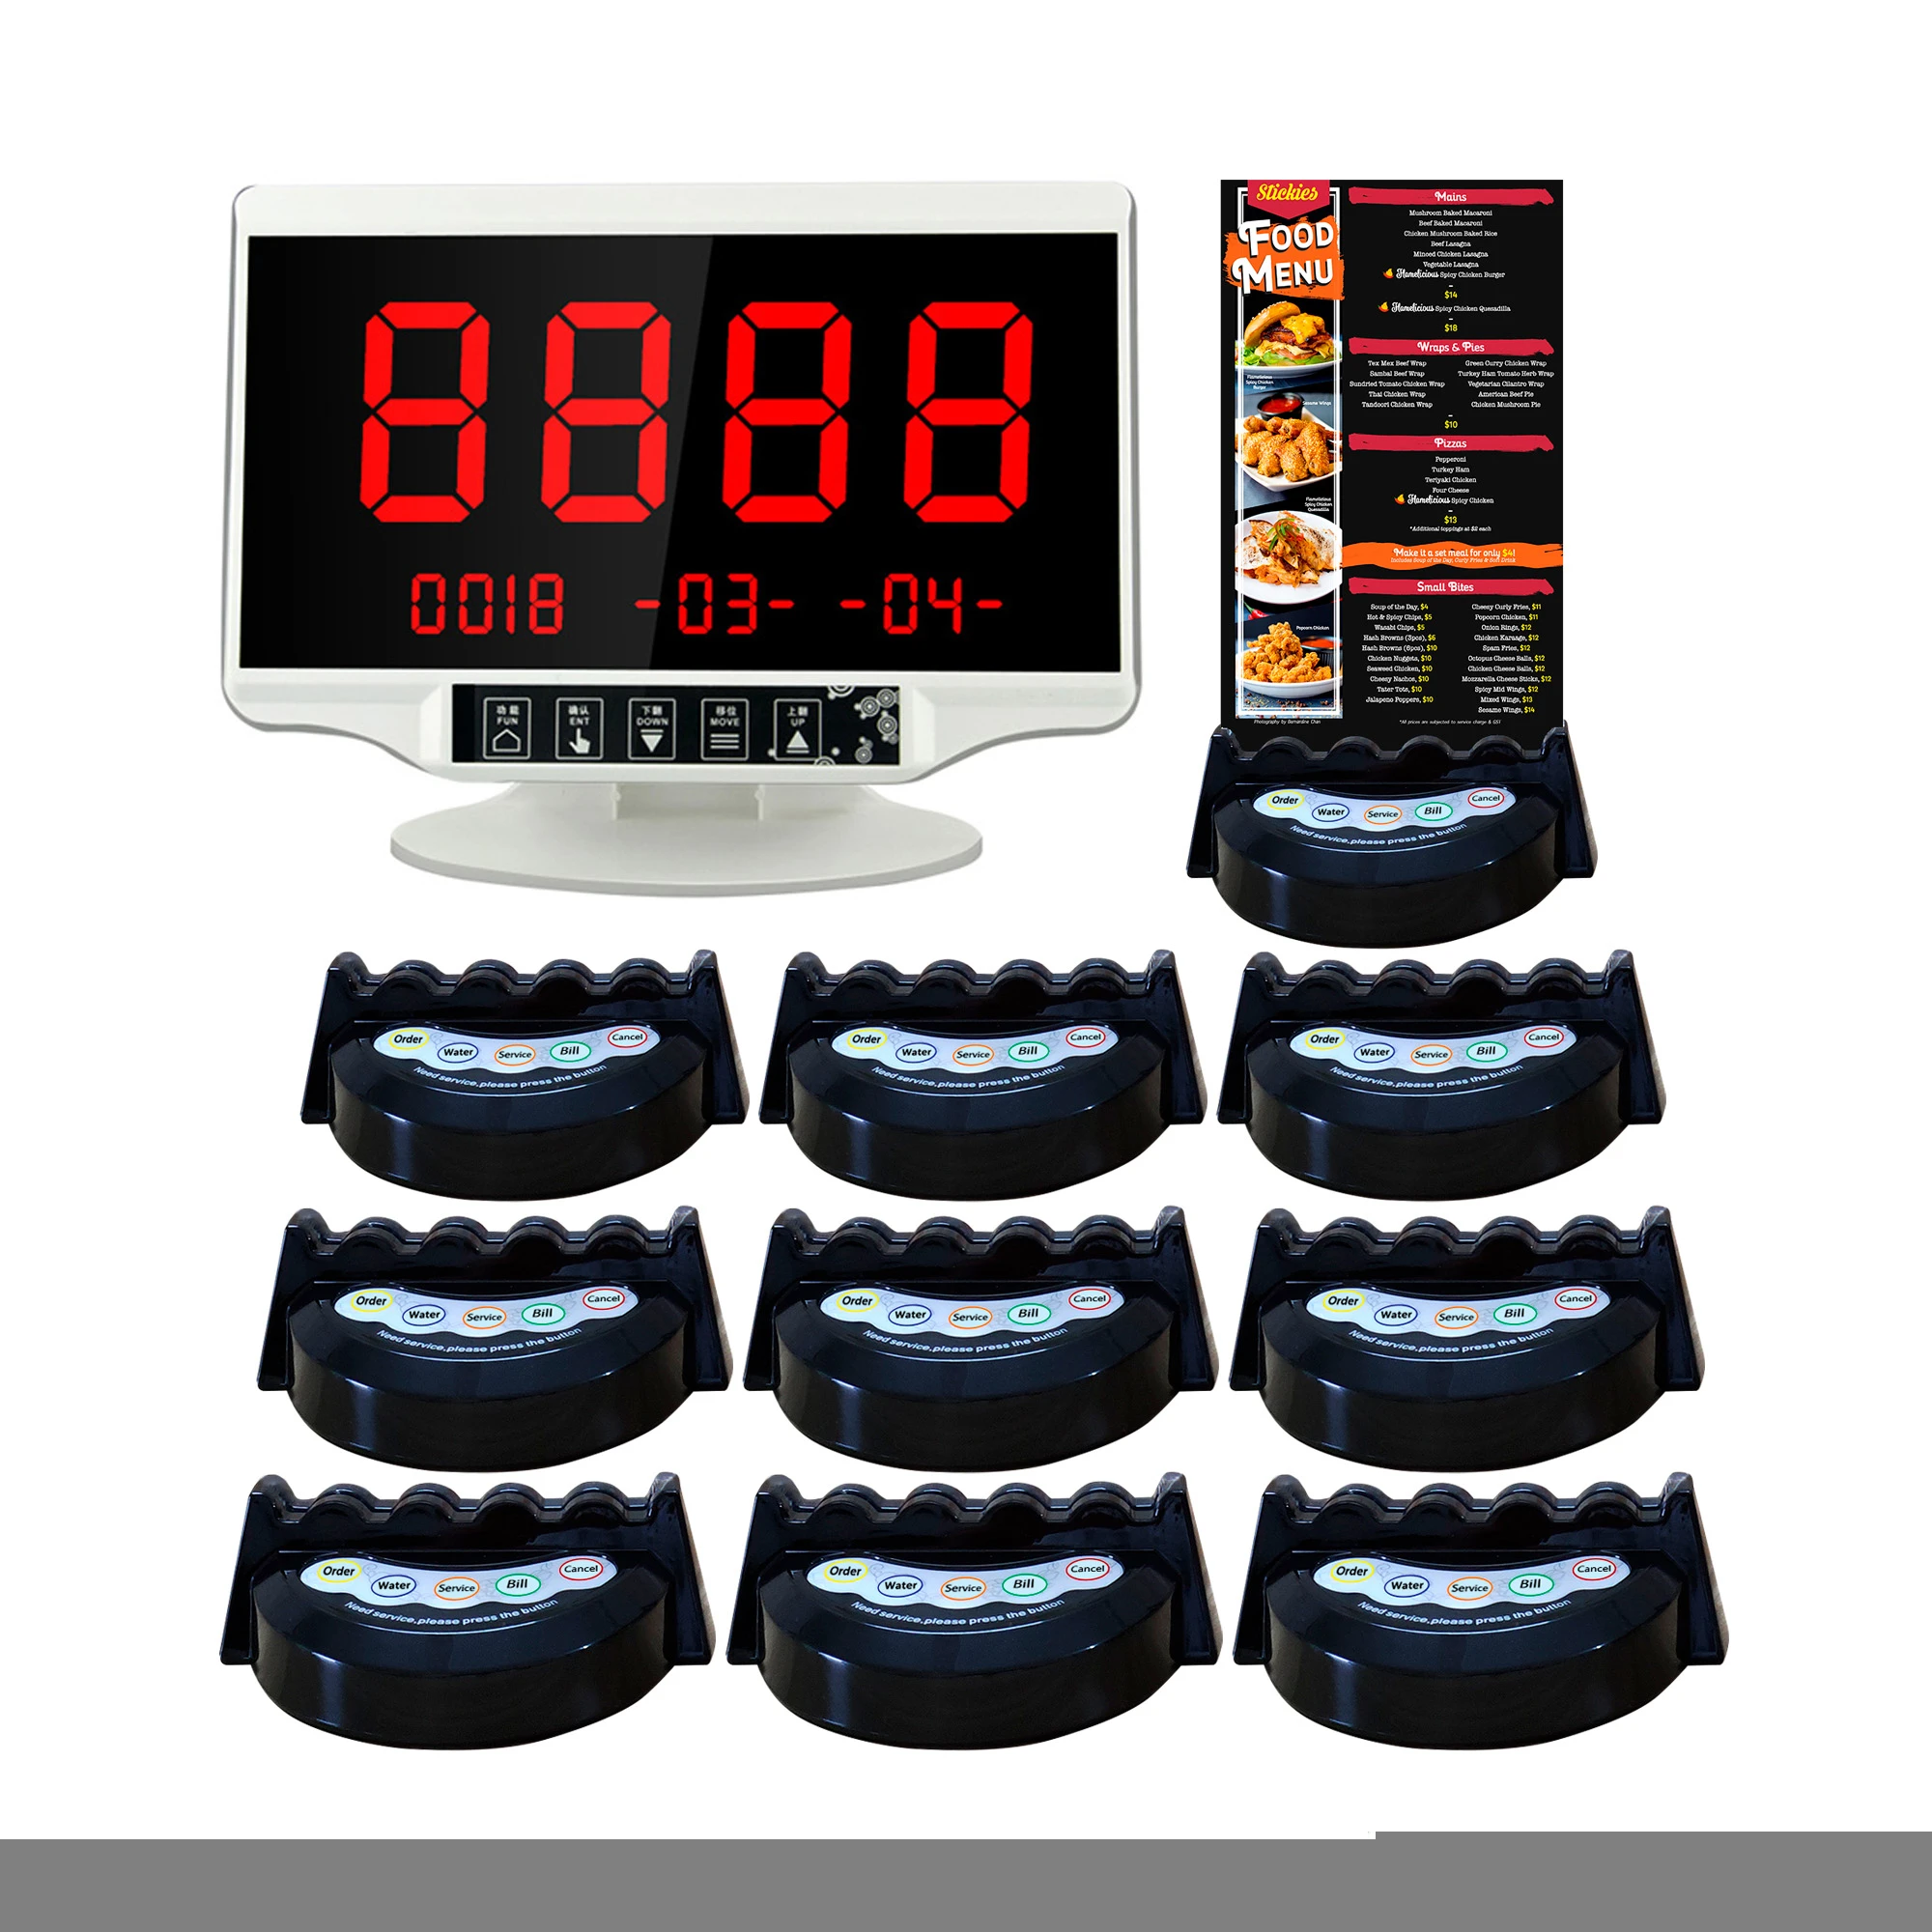 Wireless Calling system with 10 water proof pagers and OEM menu for cafe restaurant swimming pool and bars